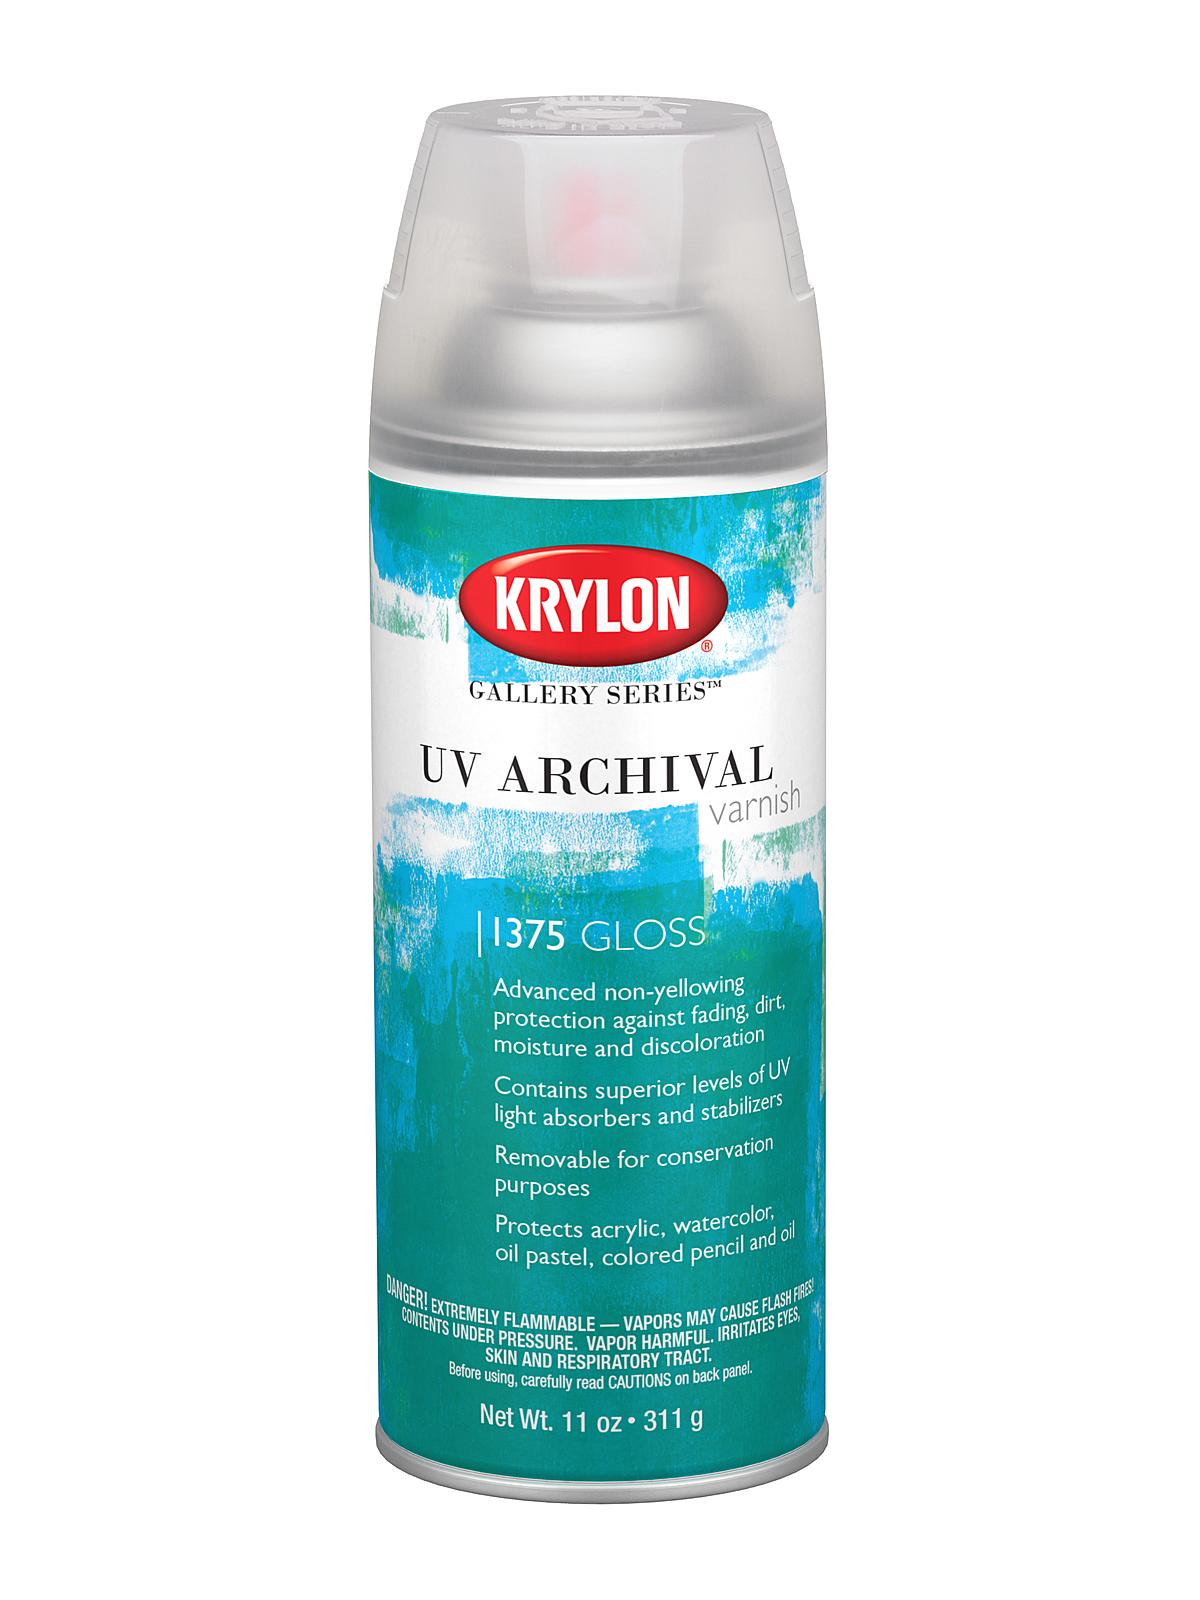 Archival Uv Varnishes Gloss 11 Oz. Can